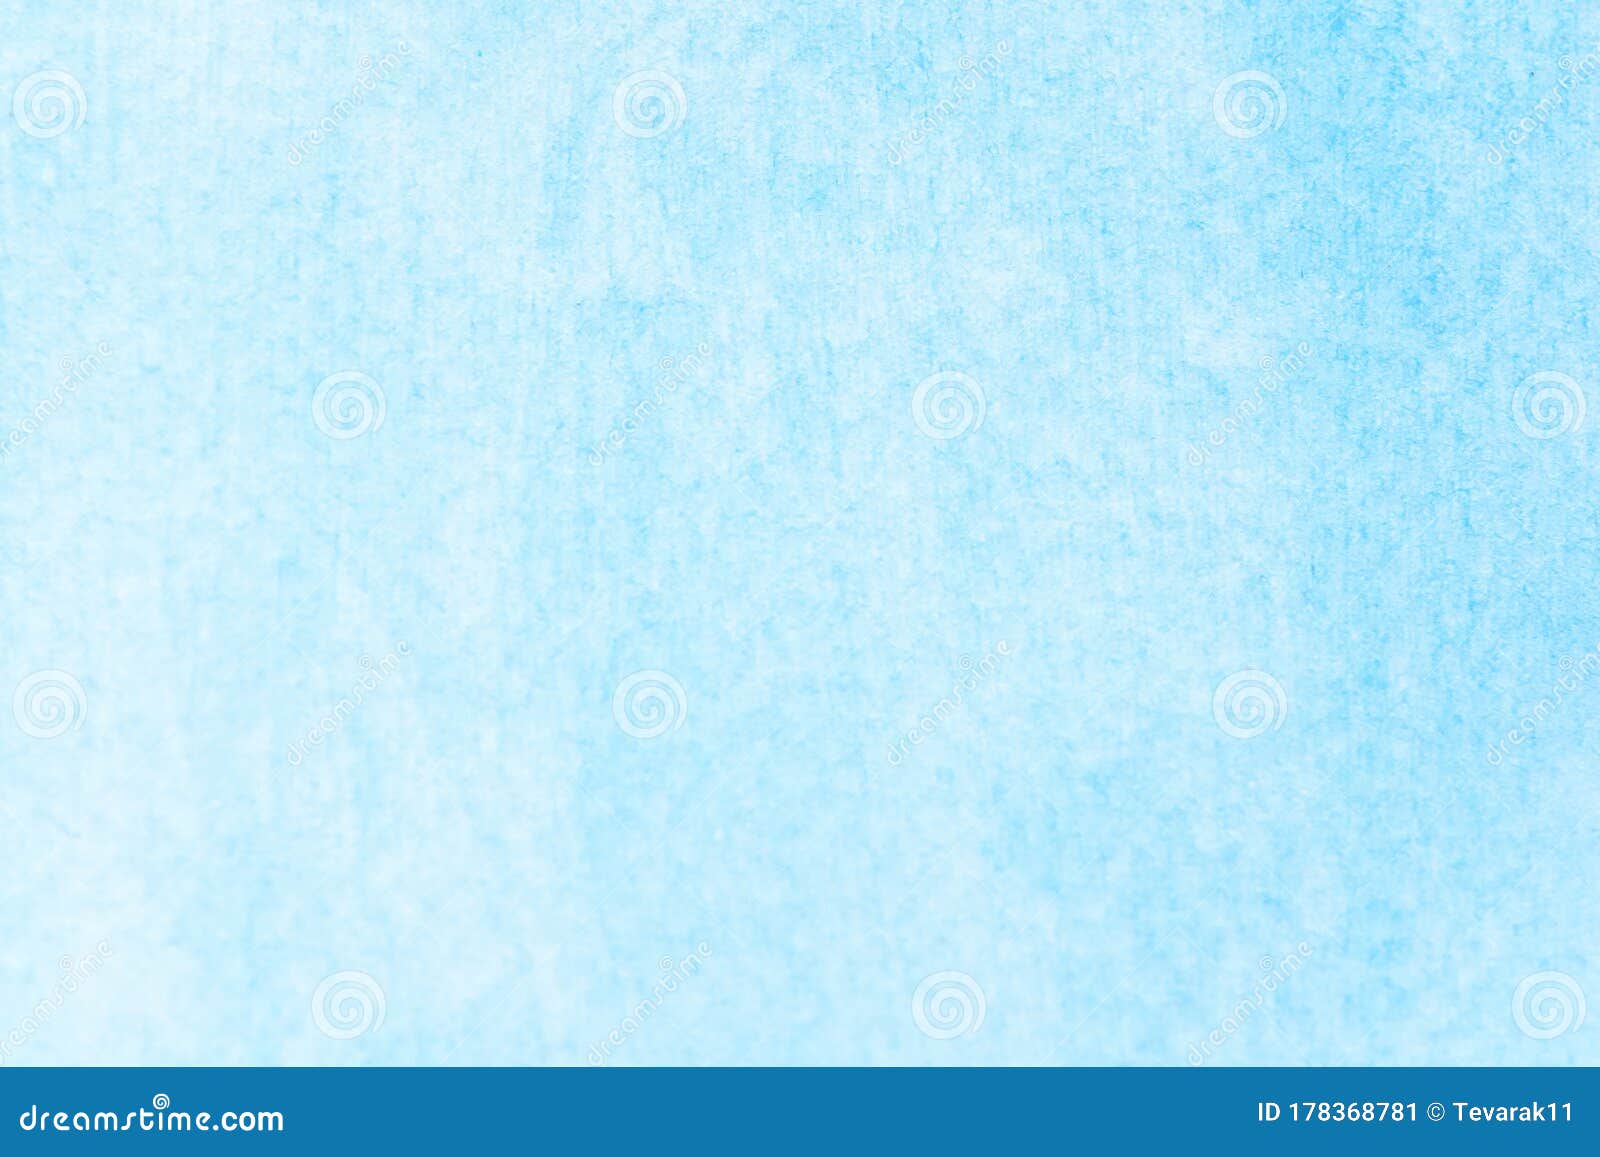 Watercolor Sky Blue Light Blue Texture As Background Stock Image - Image of  texture, paint: 178368781